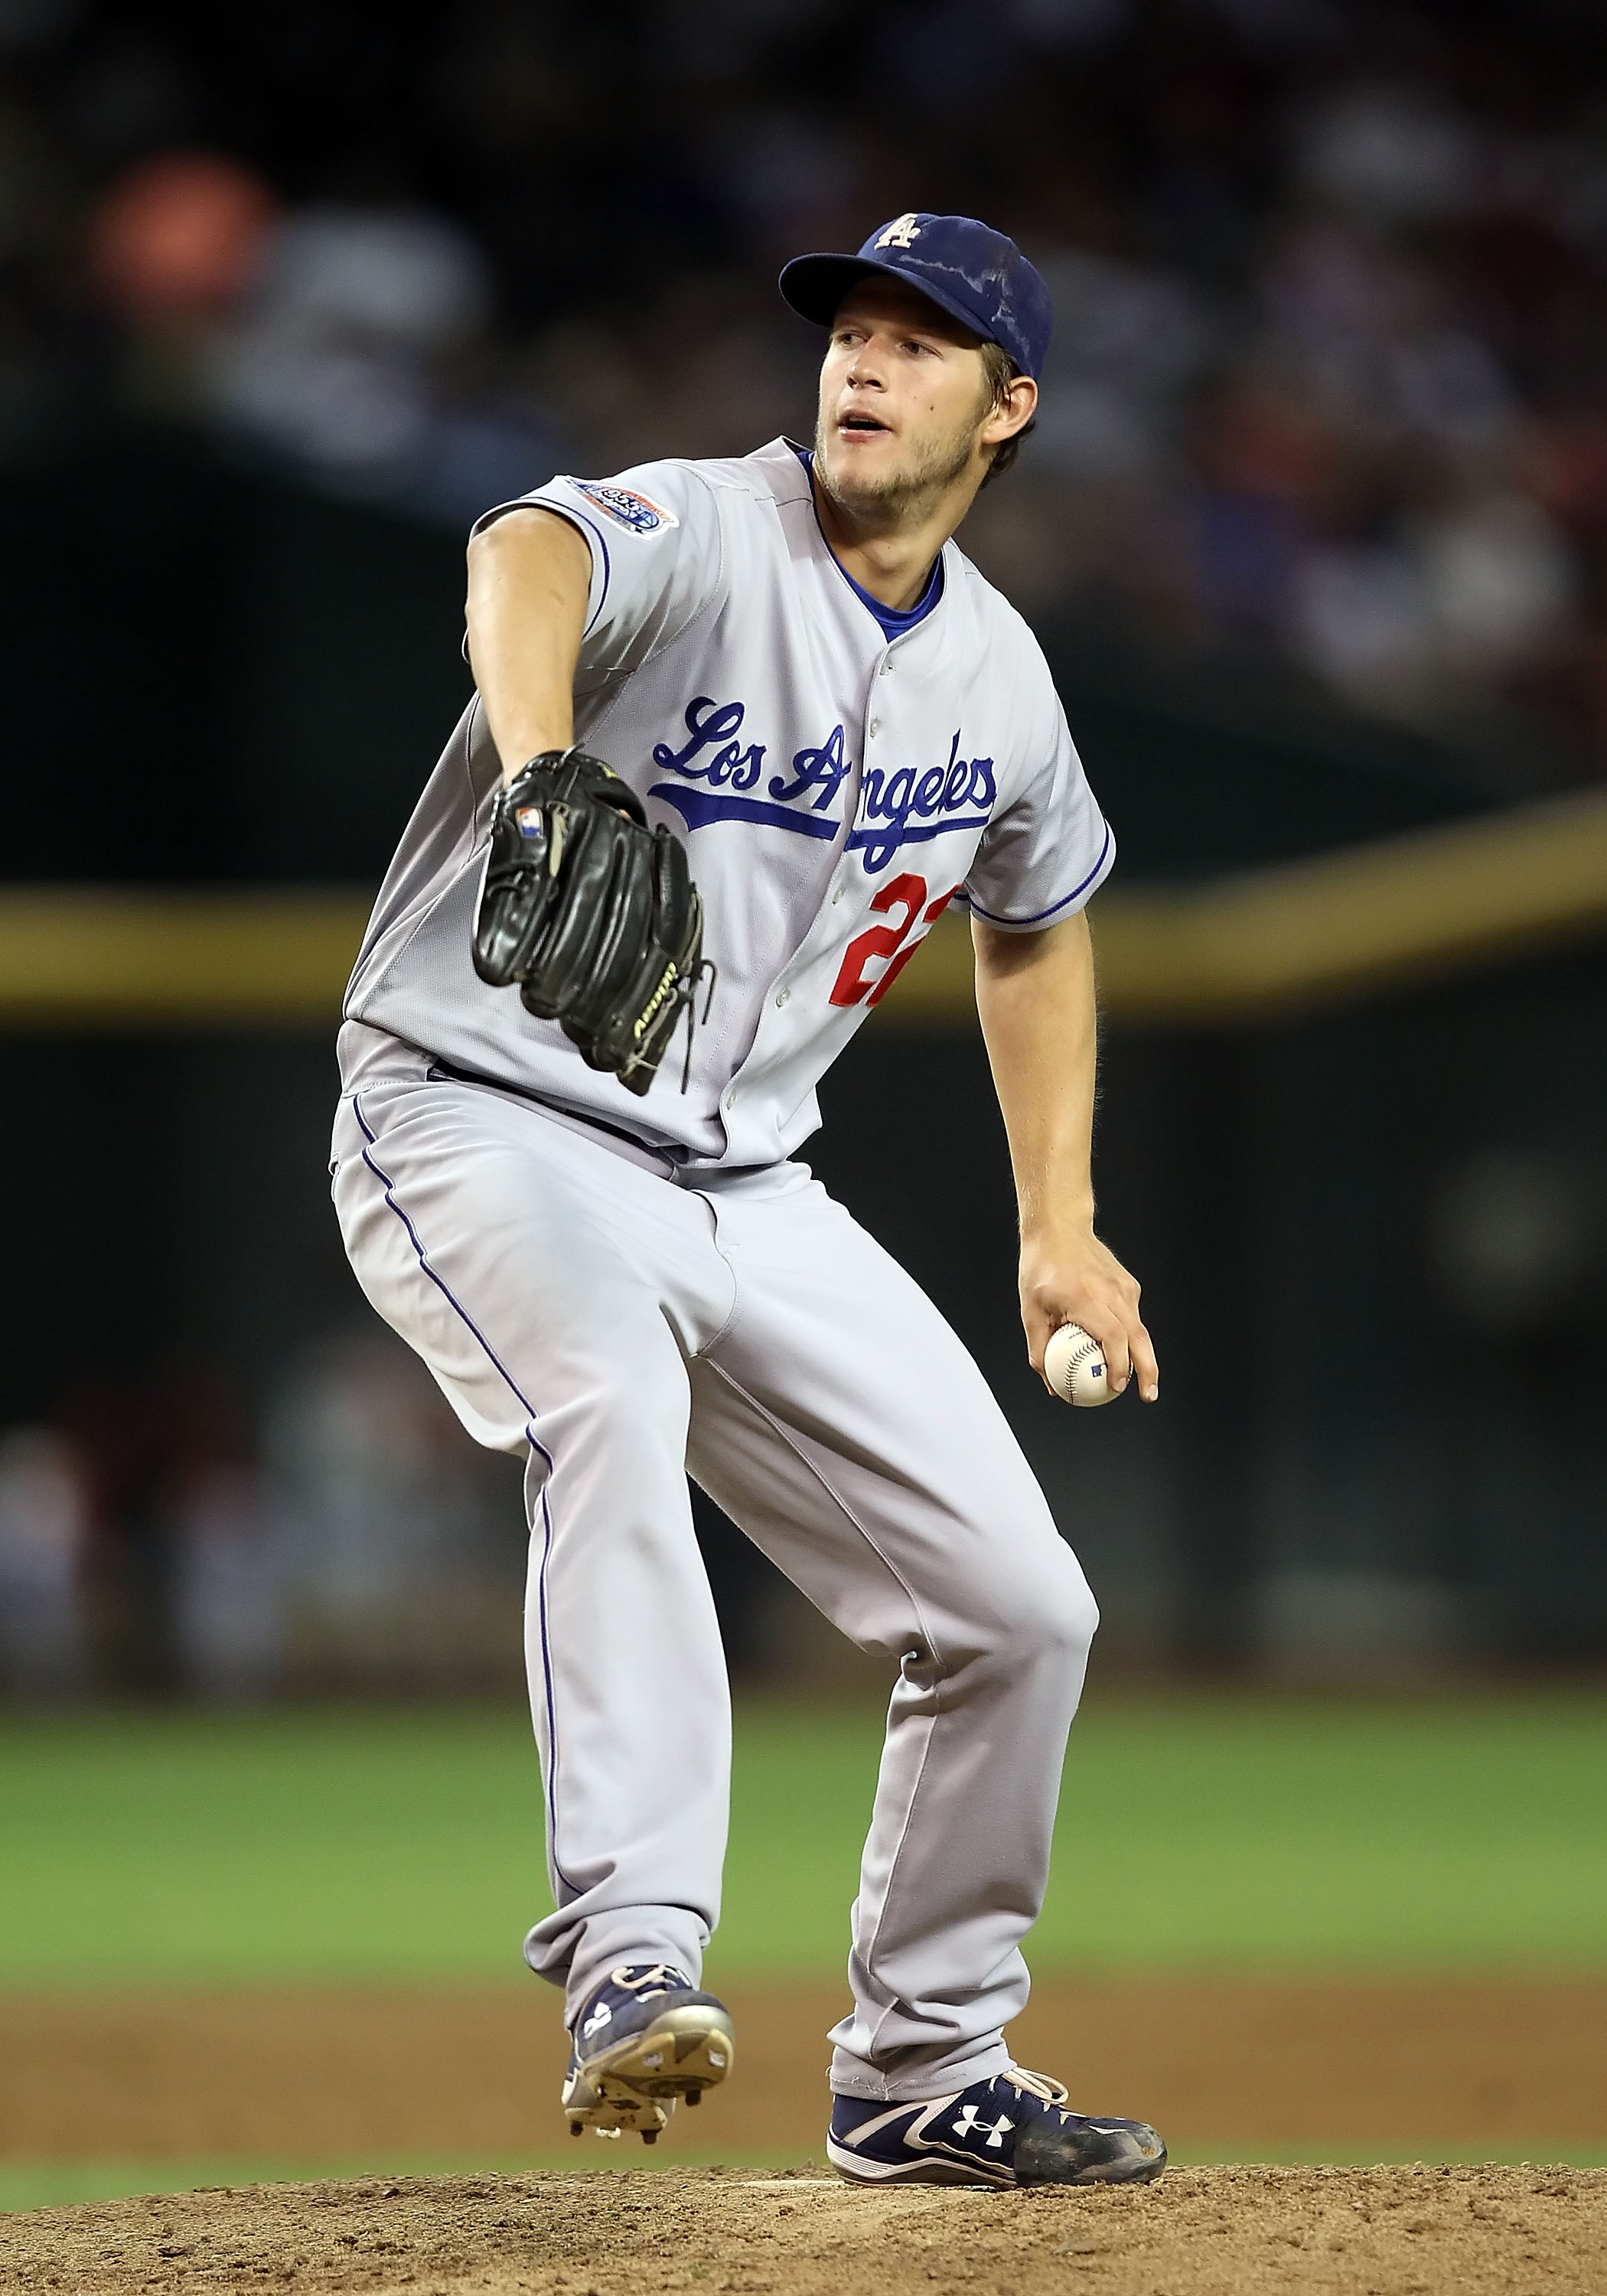 PHOENIX - SEPTEMBER 24:  Starting pitcher Clayton Kershaw #22 of the Los Angeles Dodgers pitches against the Arizona Diamondbacks during the Major League Baseball game at Chase Field on September 24, 2010 in Phoenix, Arizona.  (Photo by Christian Petersen